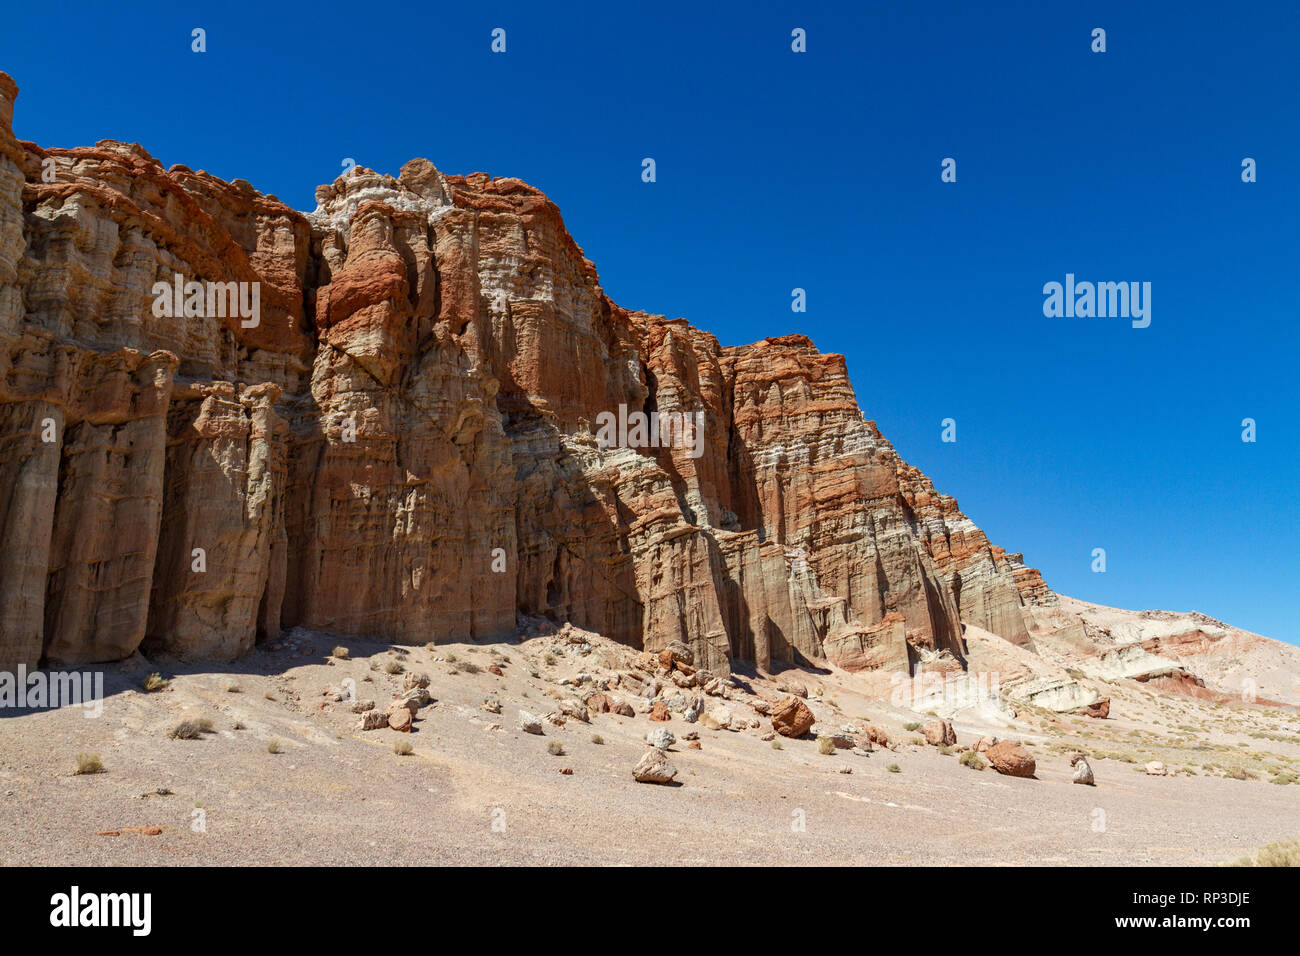 Red Rock Canyon State Park, California, United States. Stock Photo